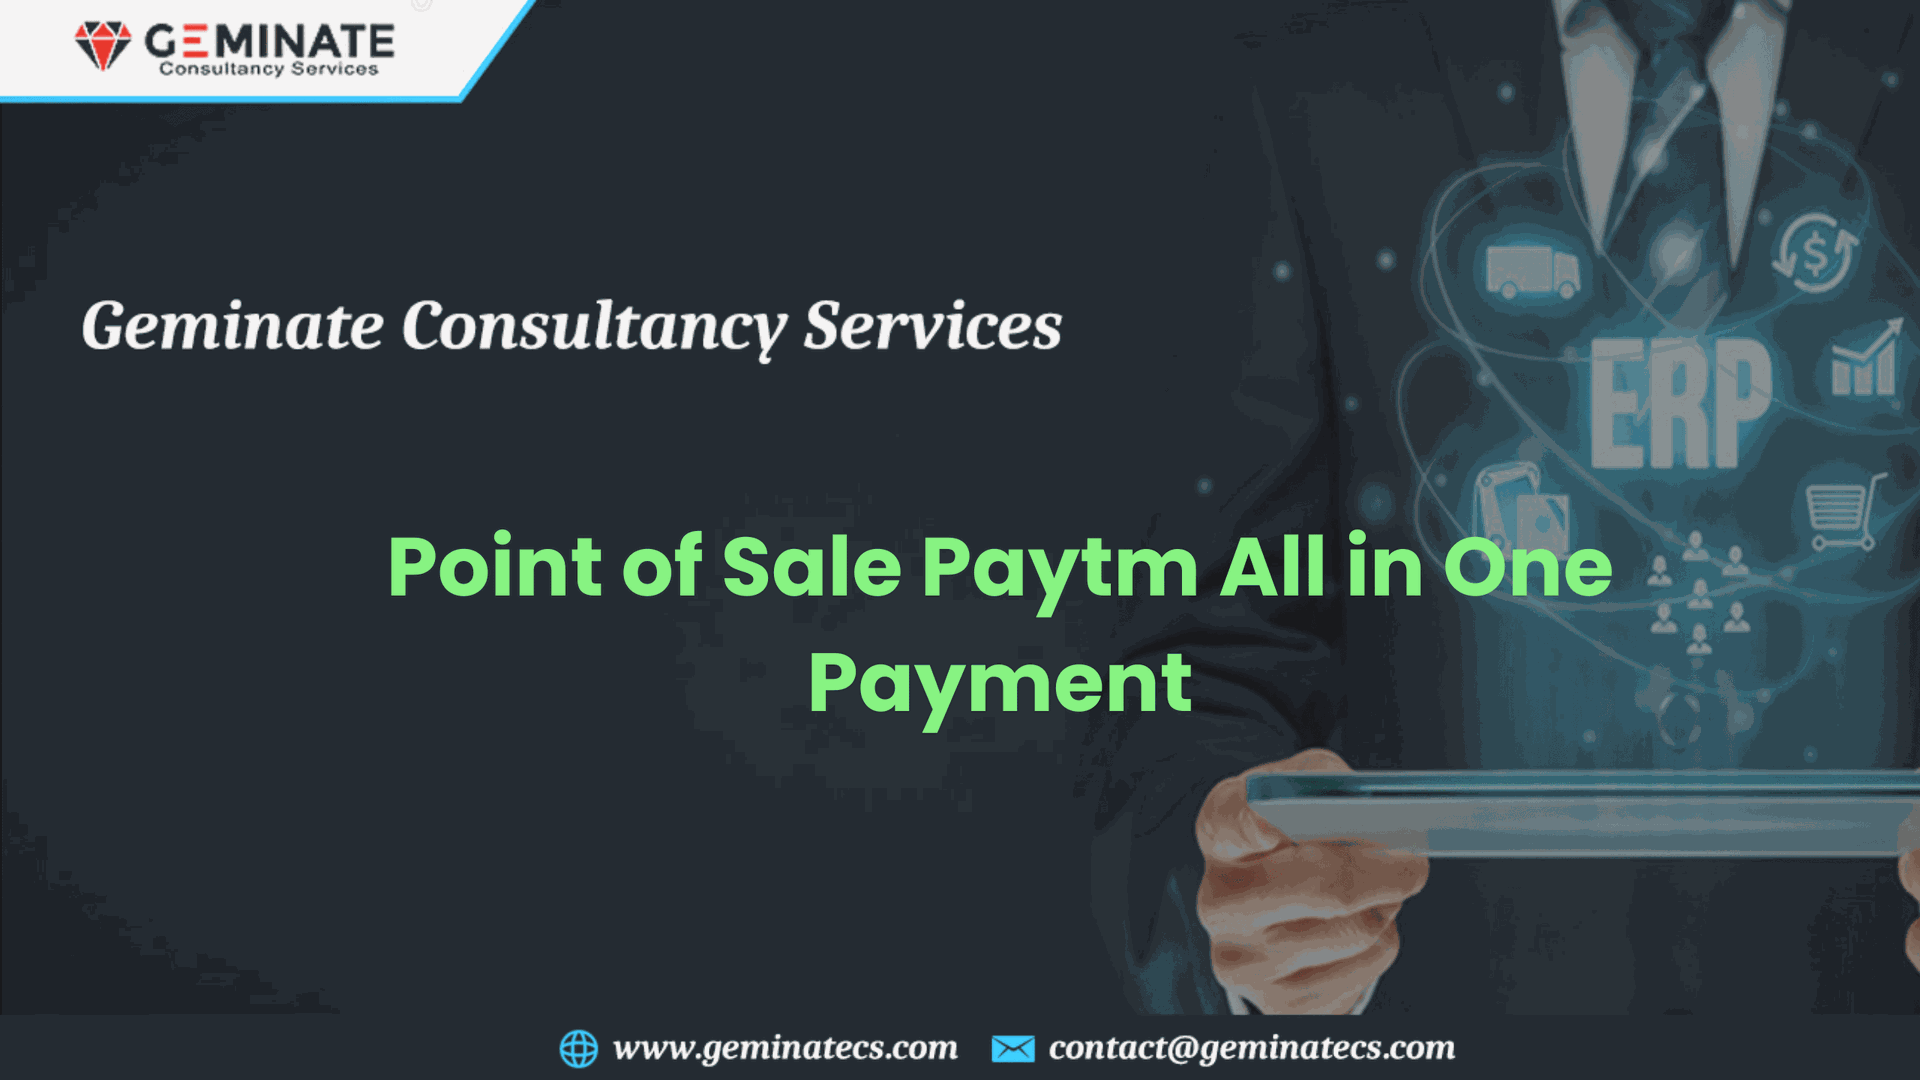 Point of Sale Paytm All in One Payment